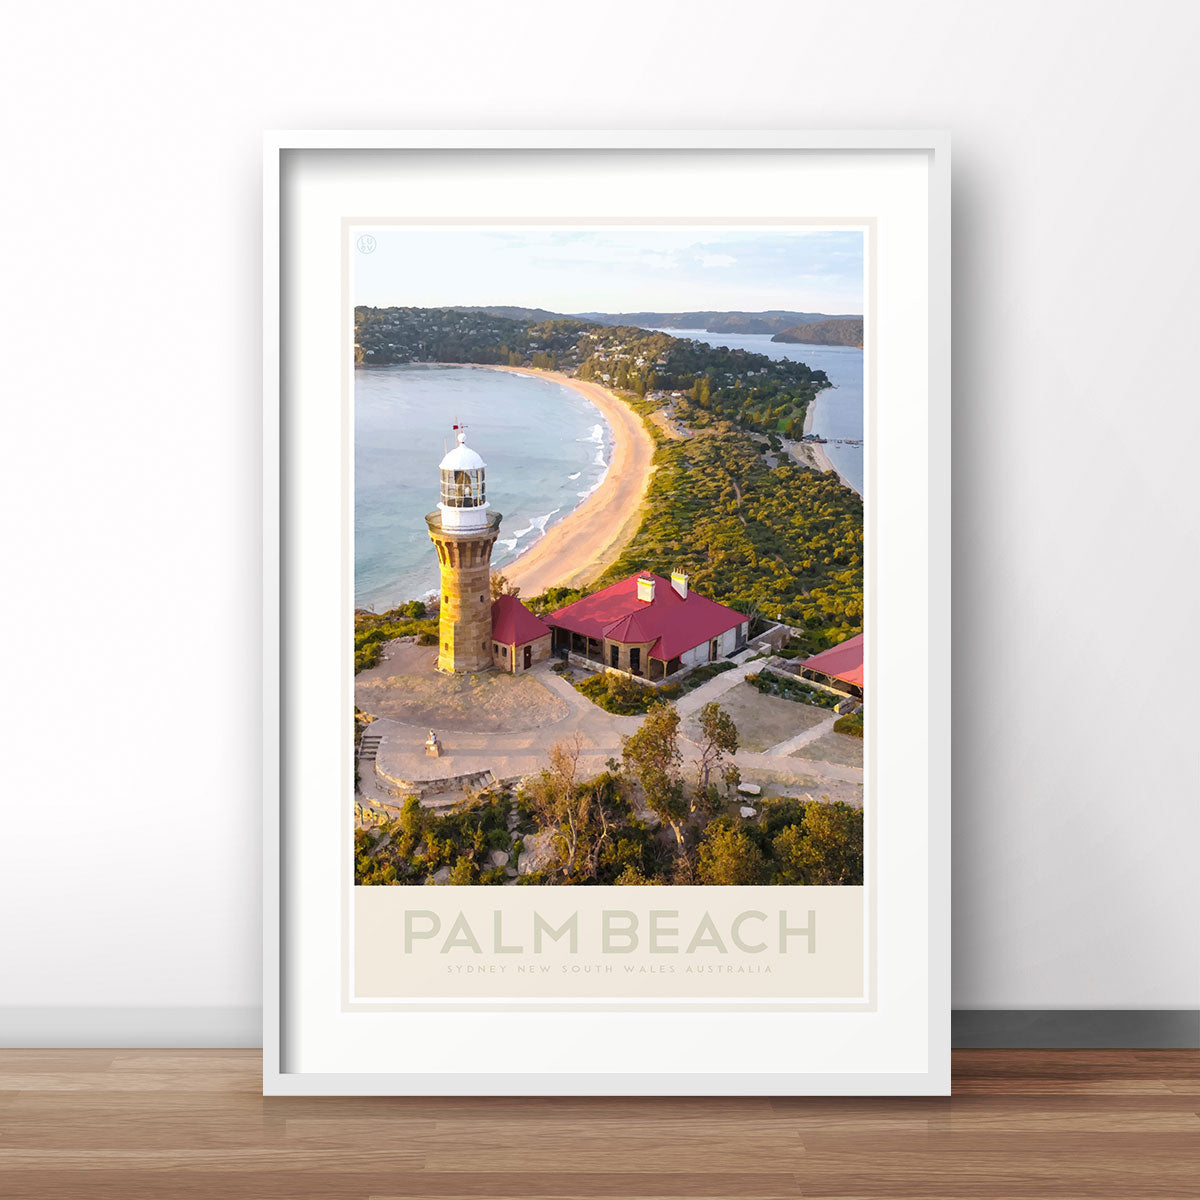 Palm Beach retro vintage travel poster print from Places We Luv